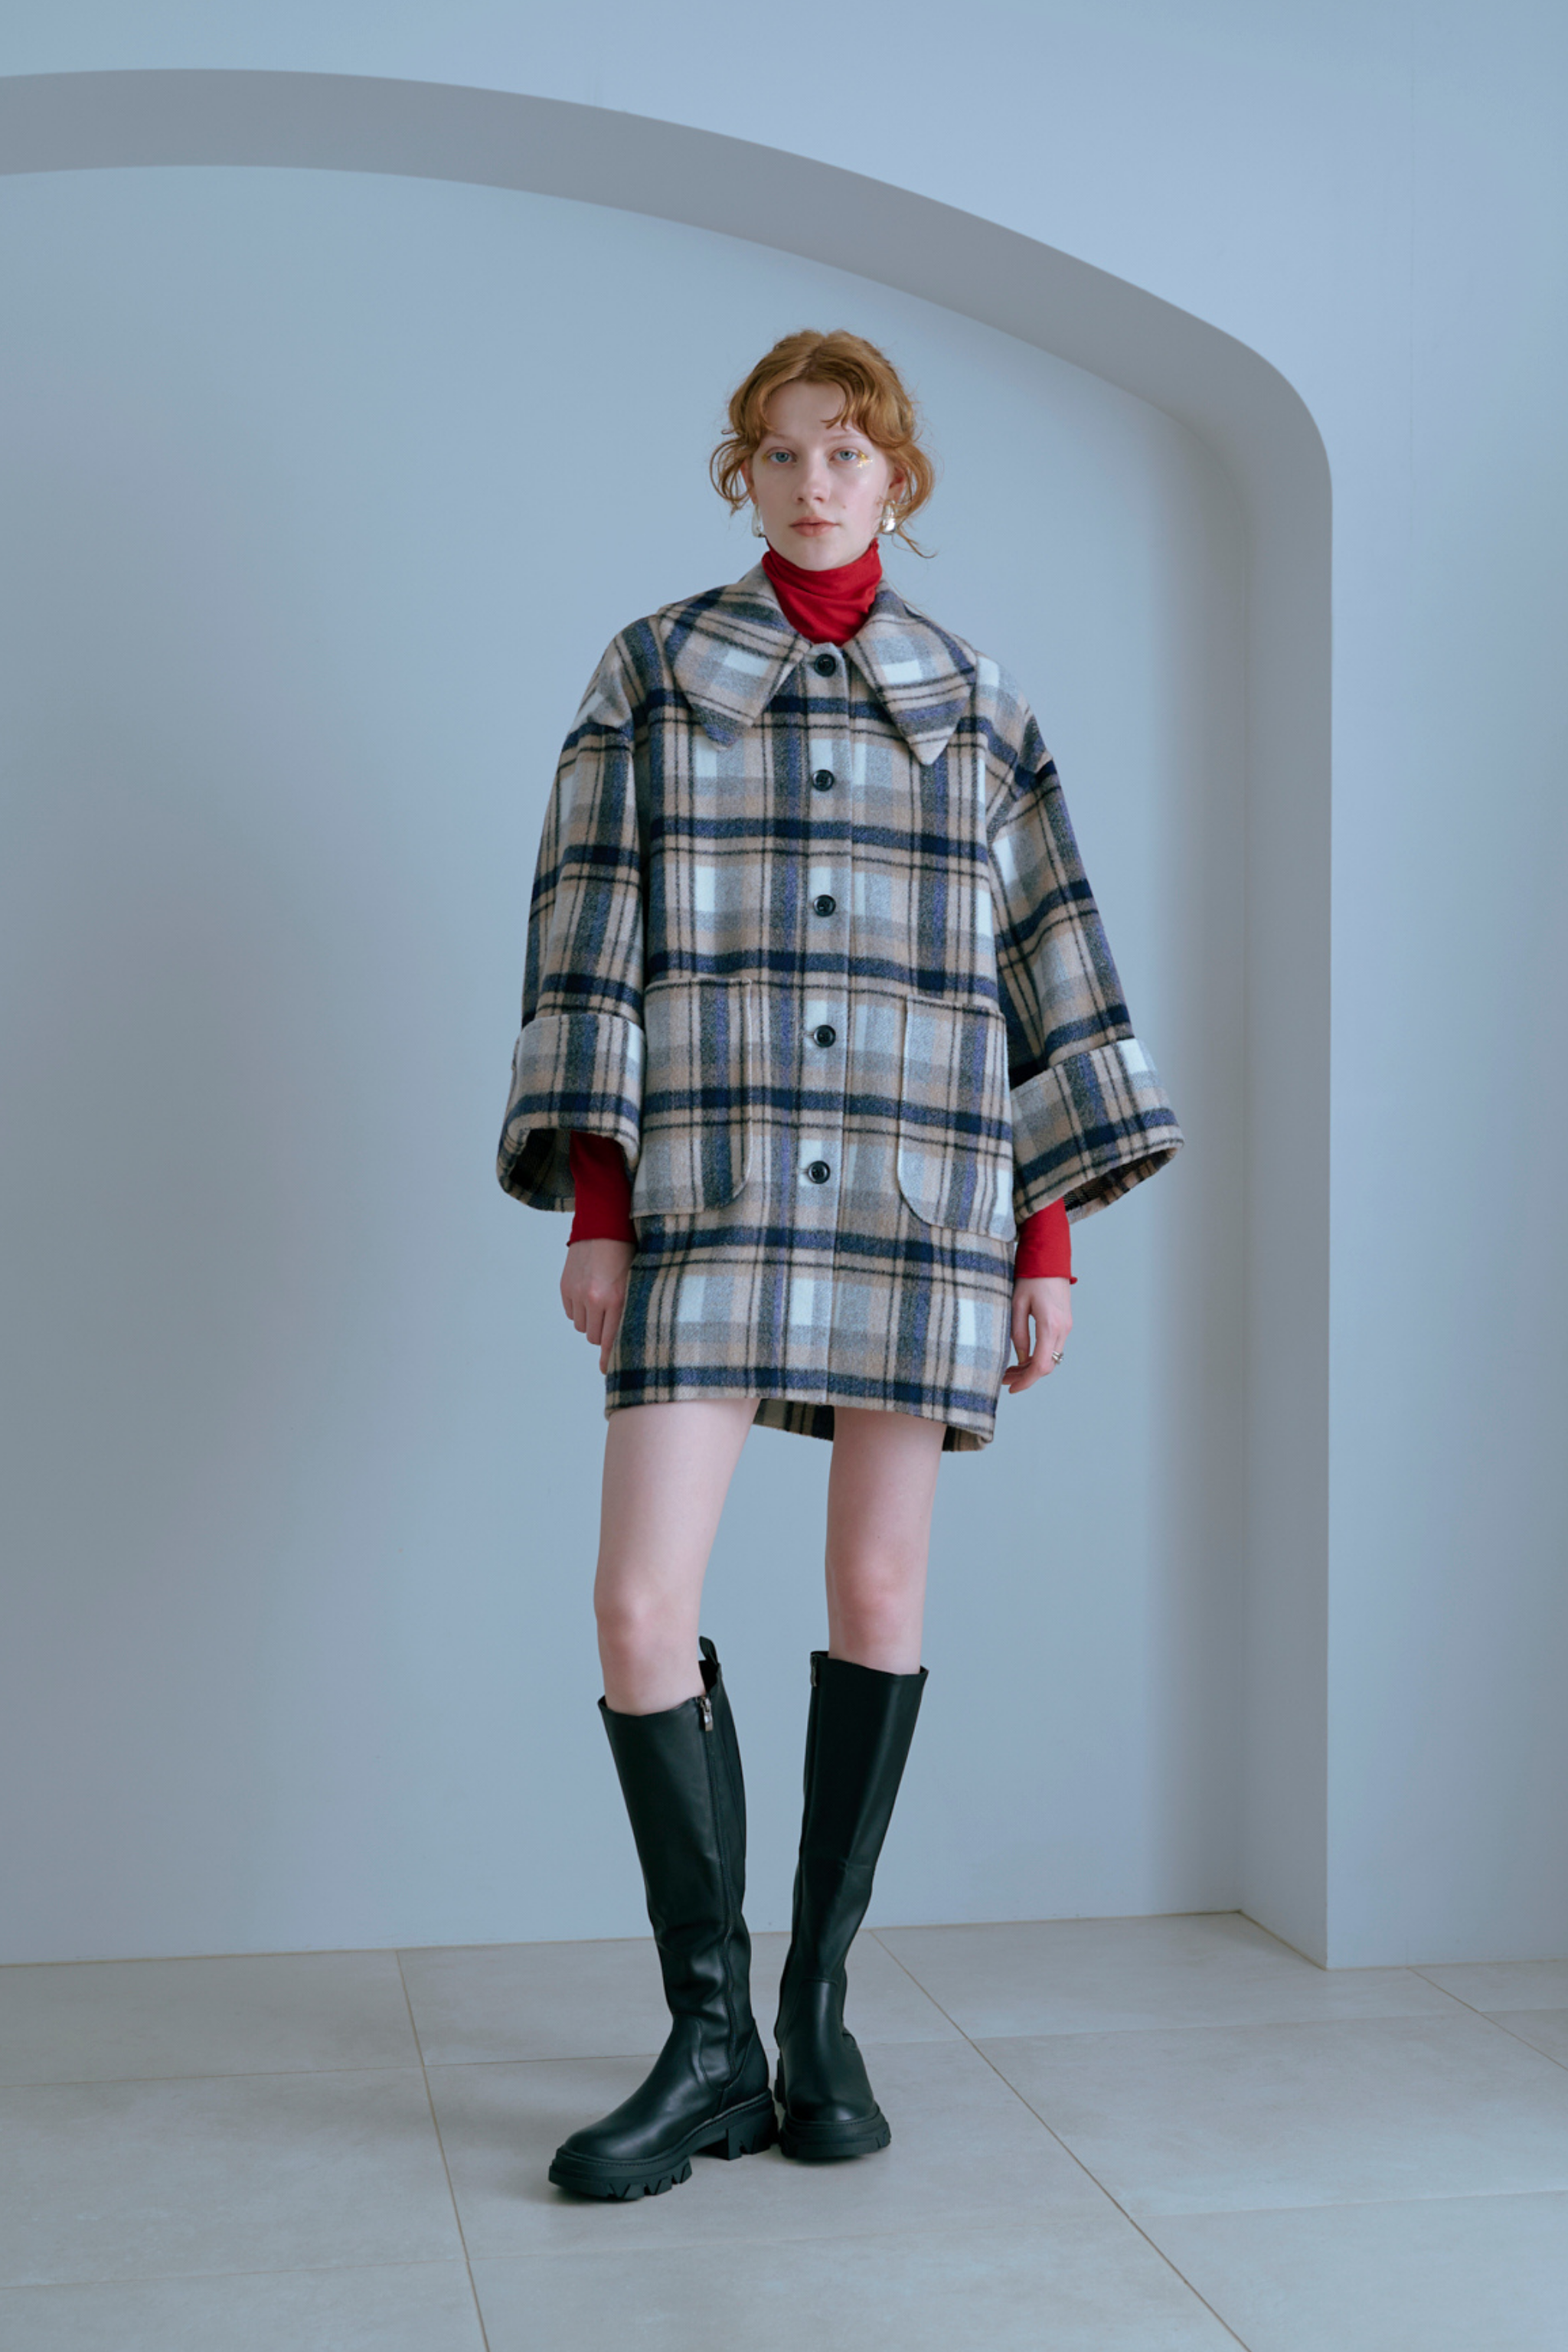 Wide Sleeve Check Coat チェックコート